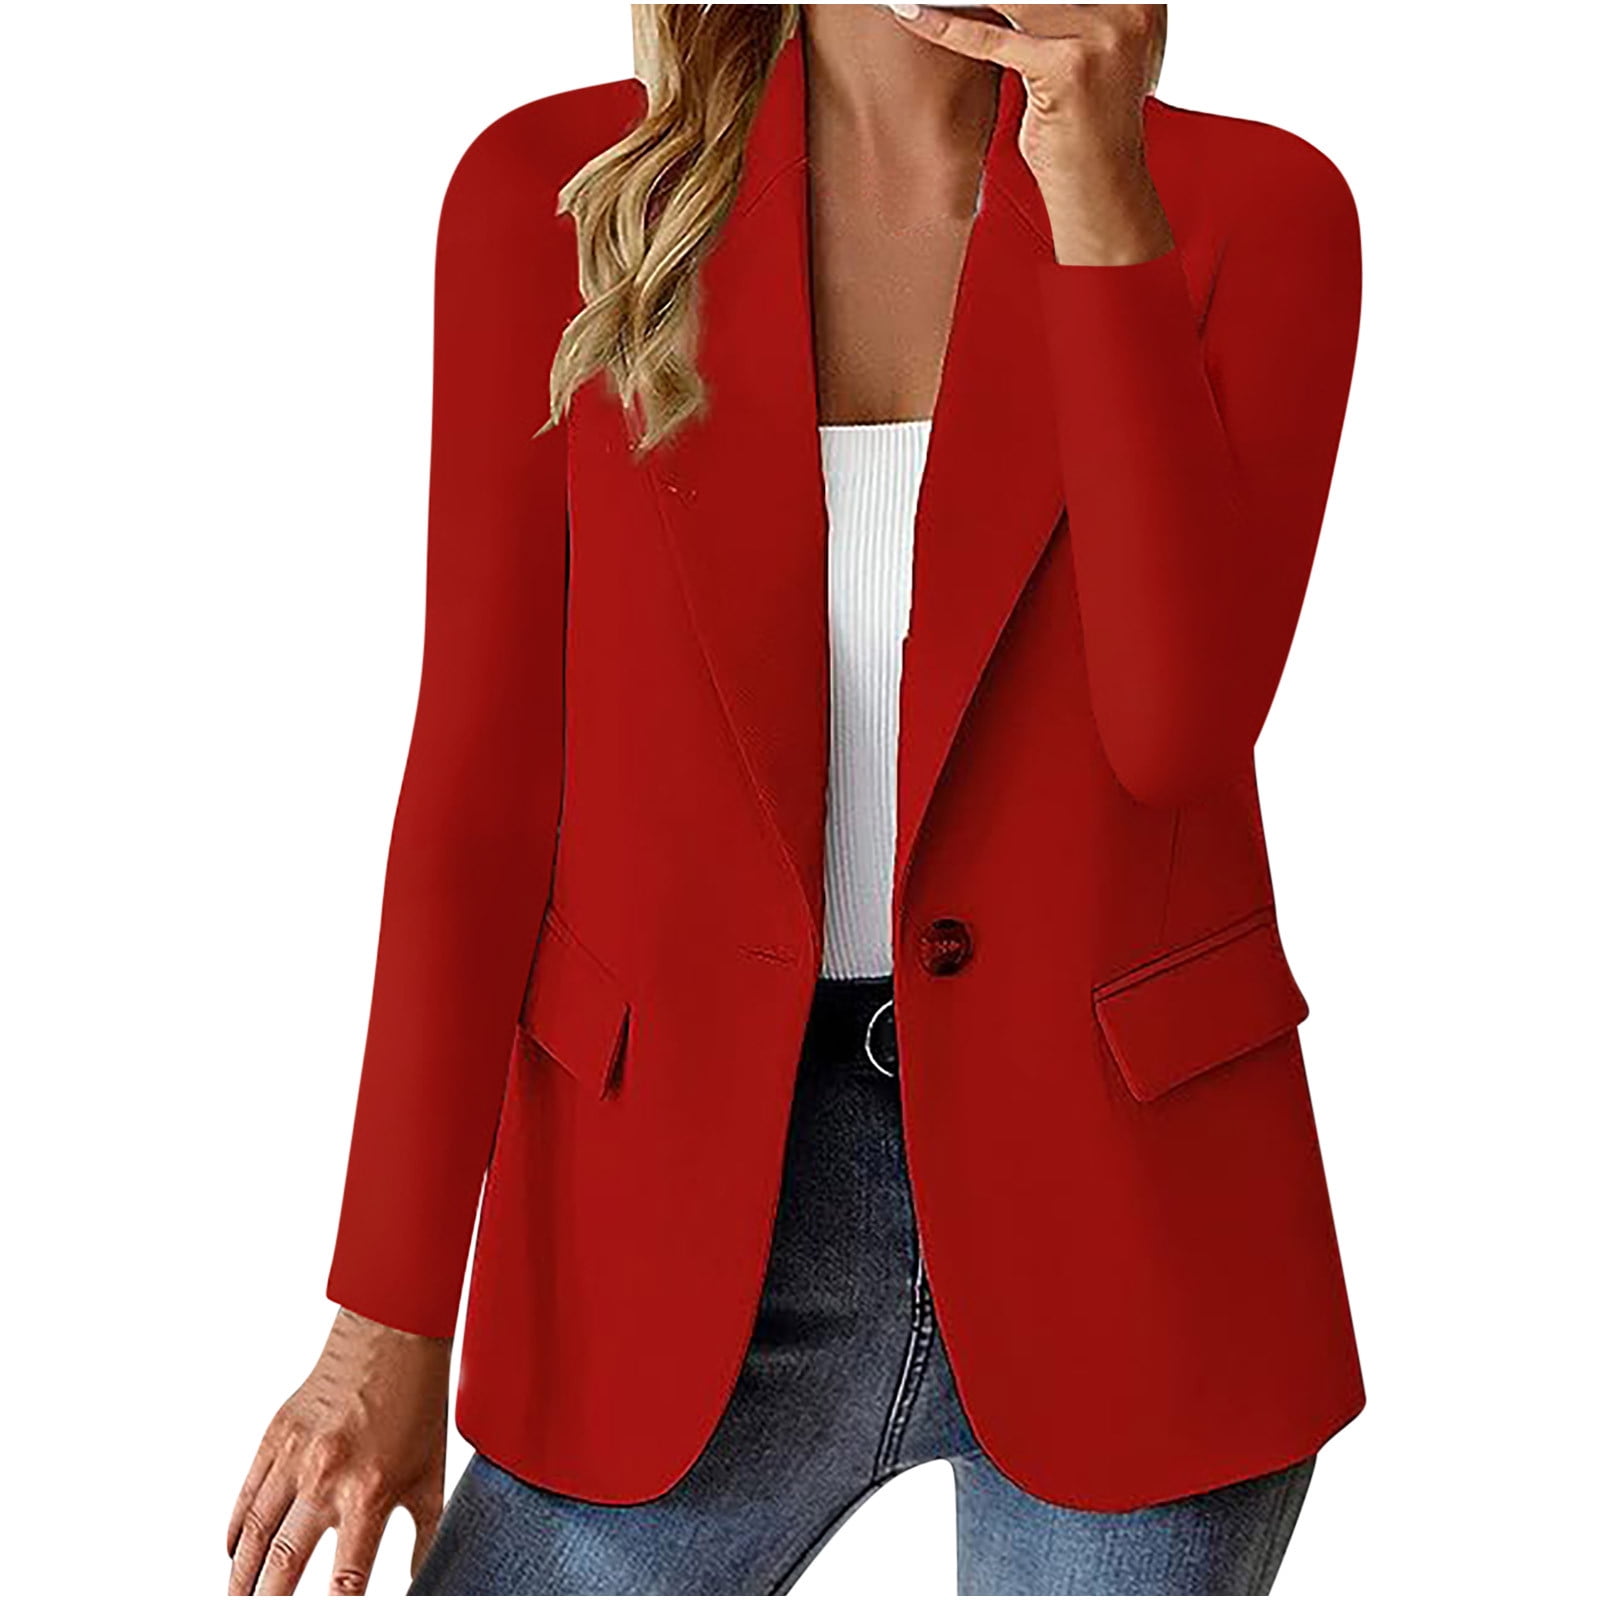 Blazers for Women Casual Lapel Long Sleeve Button Front Suit Jackets ...